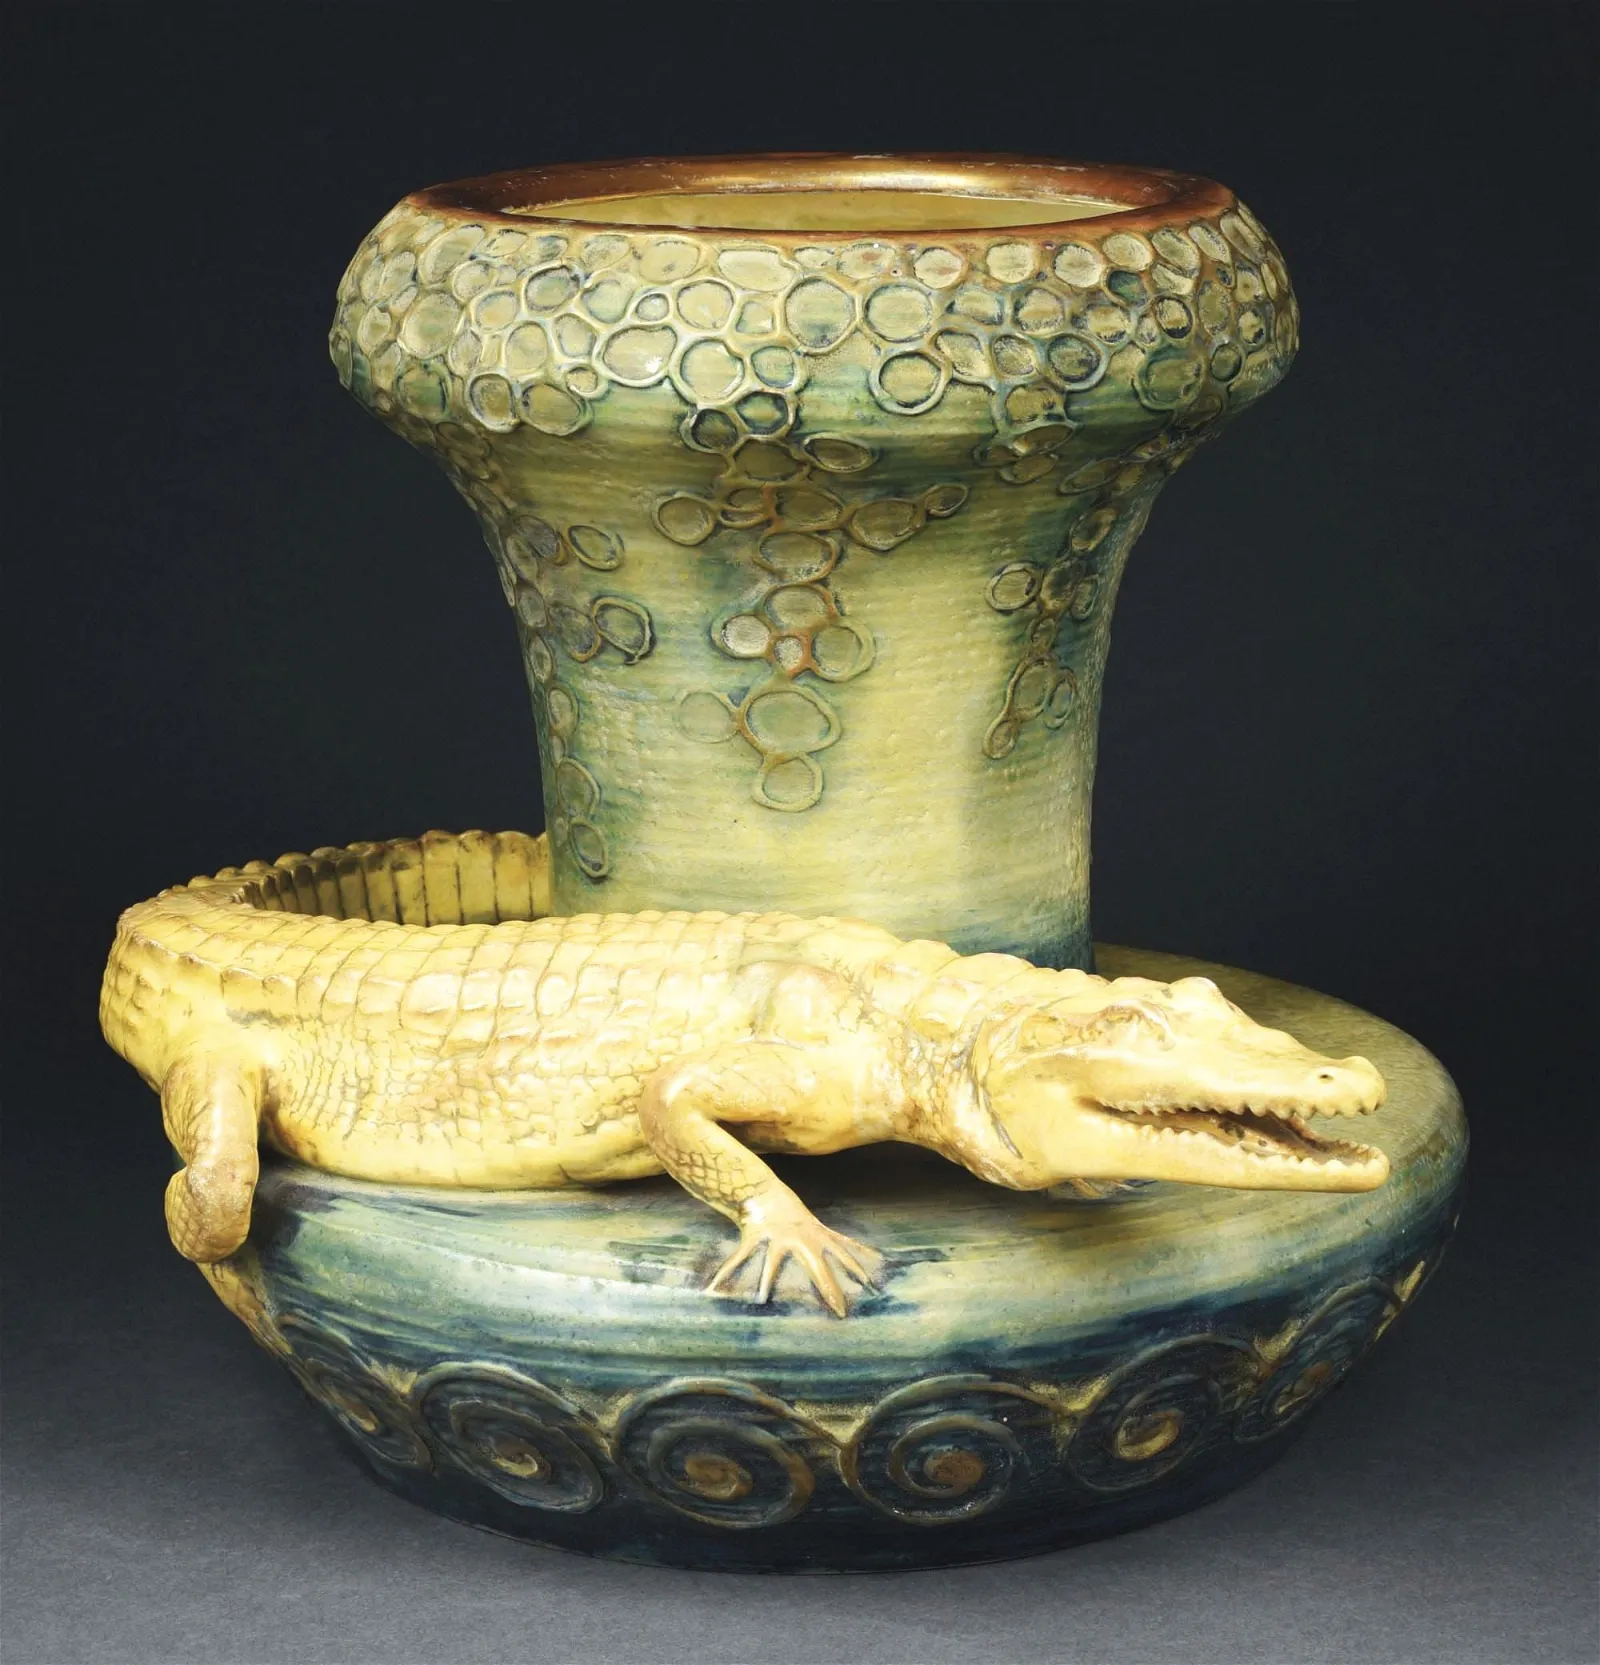 Rolex watches, Tiffany lamps and an Amphora Crocodile vase enliven Morphy&#8217;s Dec. 18-19 auction